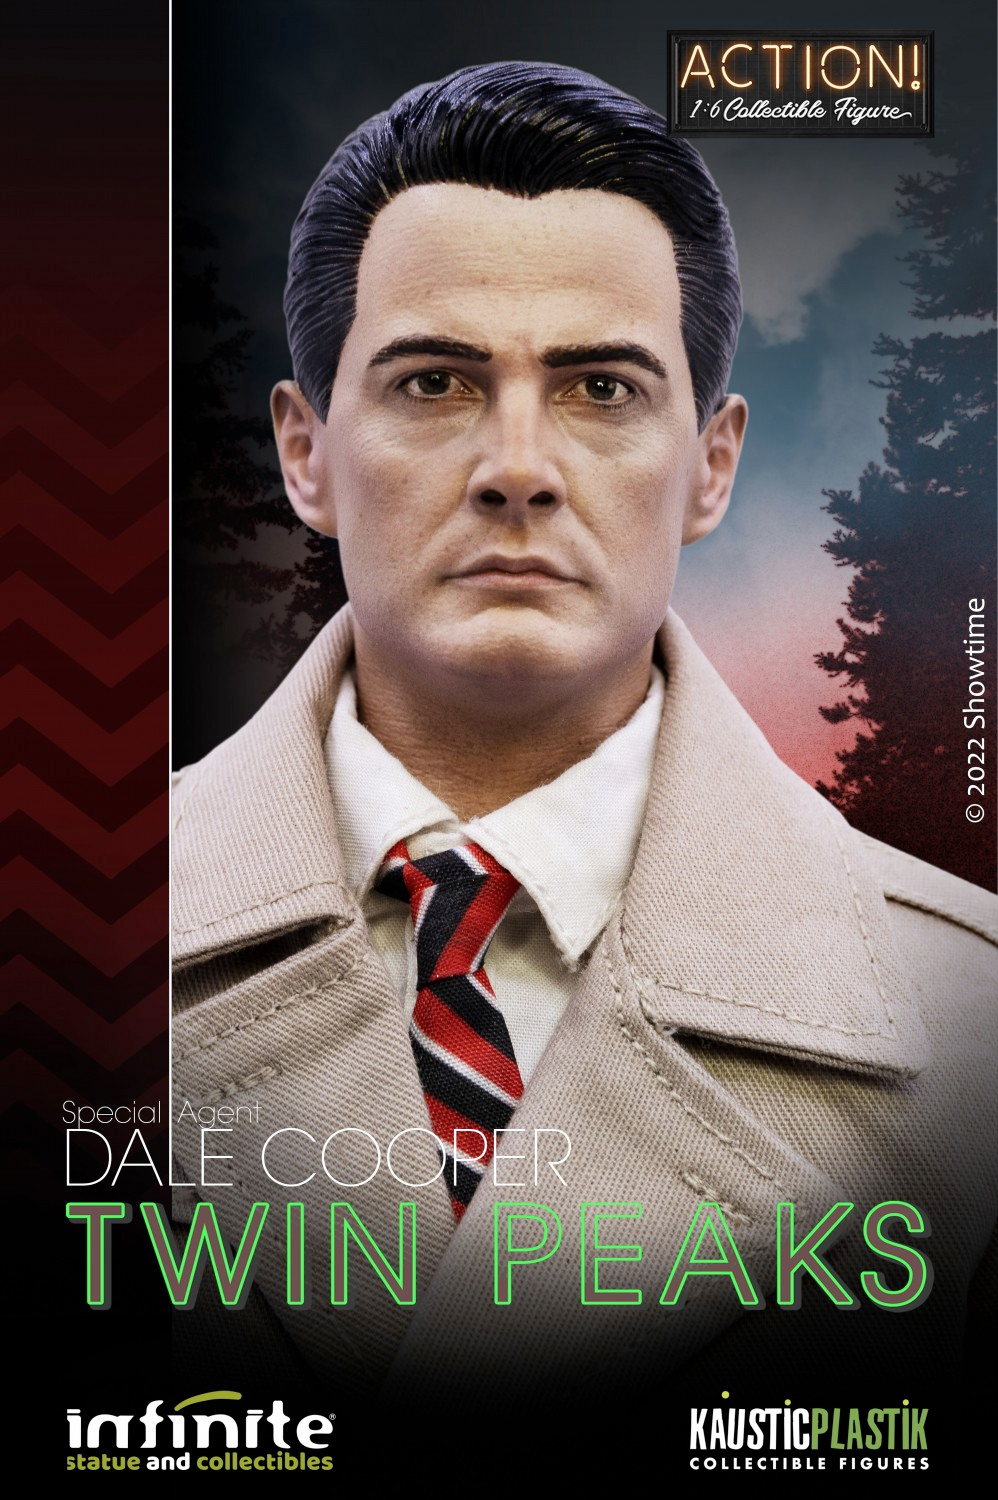 Special Agent Dale Cooper 1/6 Action Figure